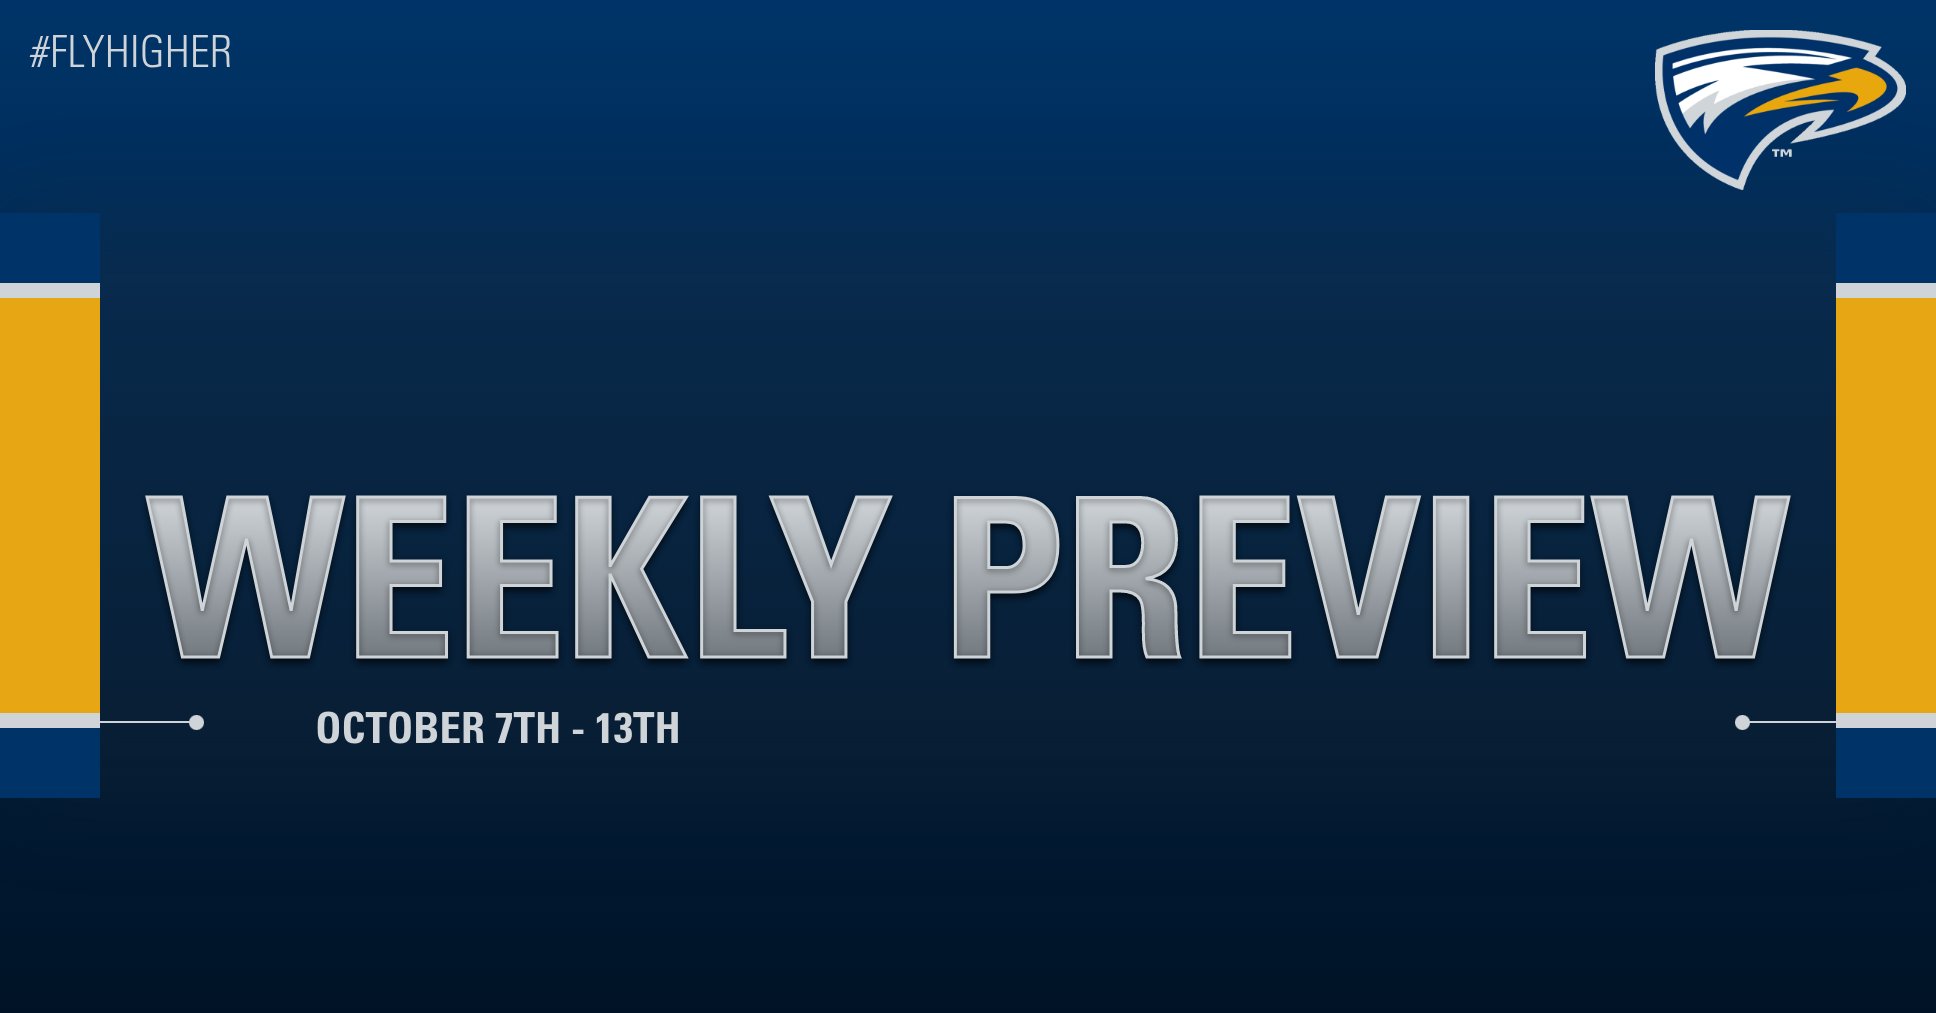 Emory Athletics Weekly Preview - October 7th - 13th